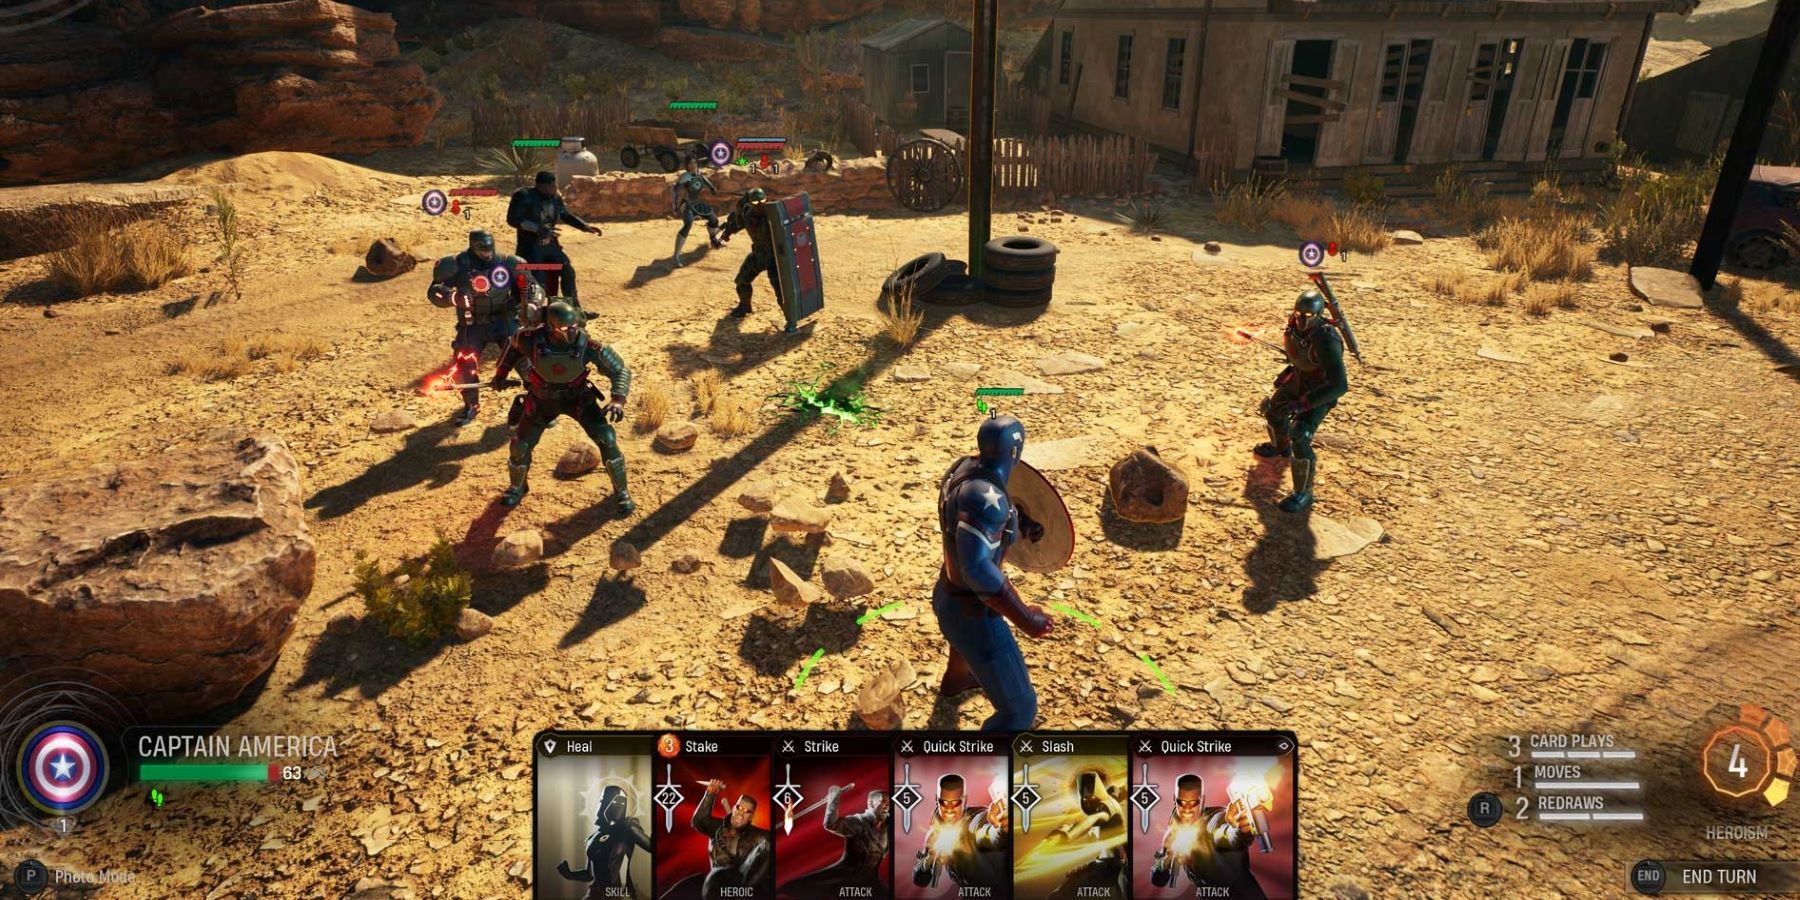 Captain America, Blade, and the Hunter fighting HYDRA agents in the desert in Marvel's Midnight Suns